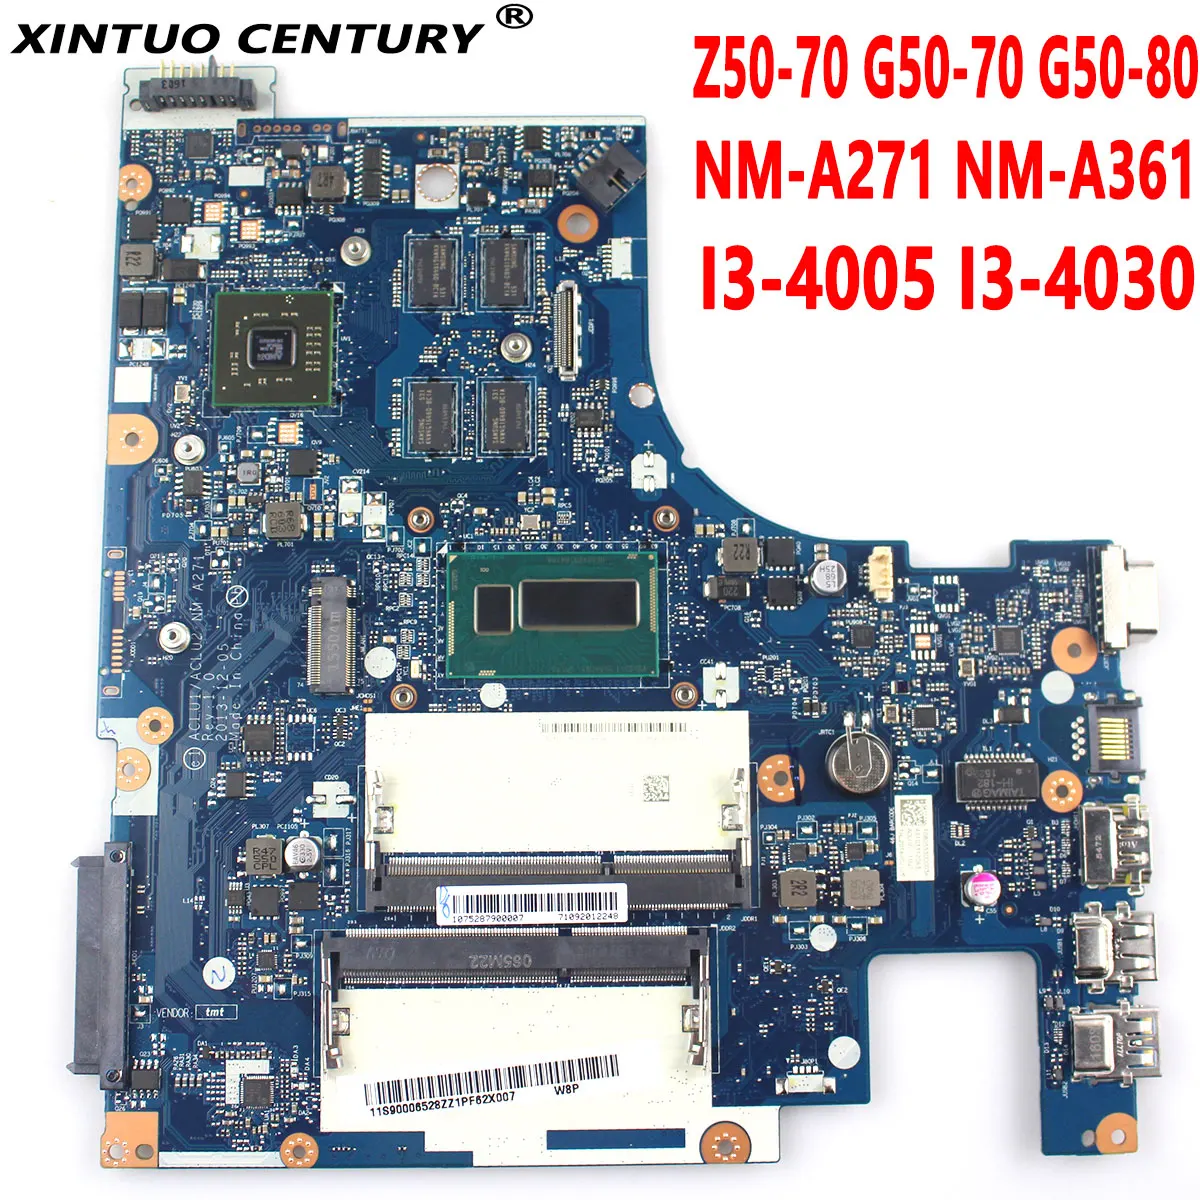 

ACLU1/ACLU2 NM-A271 NM-A361 for Lenovo Z50-70 G50-70 G50-80 laptop motherboard I3-4005 I3-4030 CPU HD8500M R5 M230 100% tested